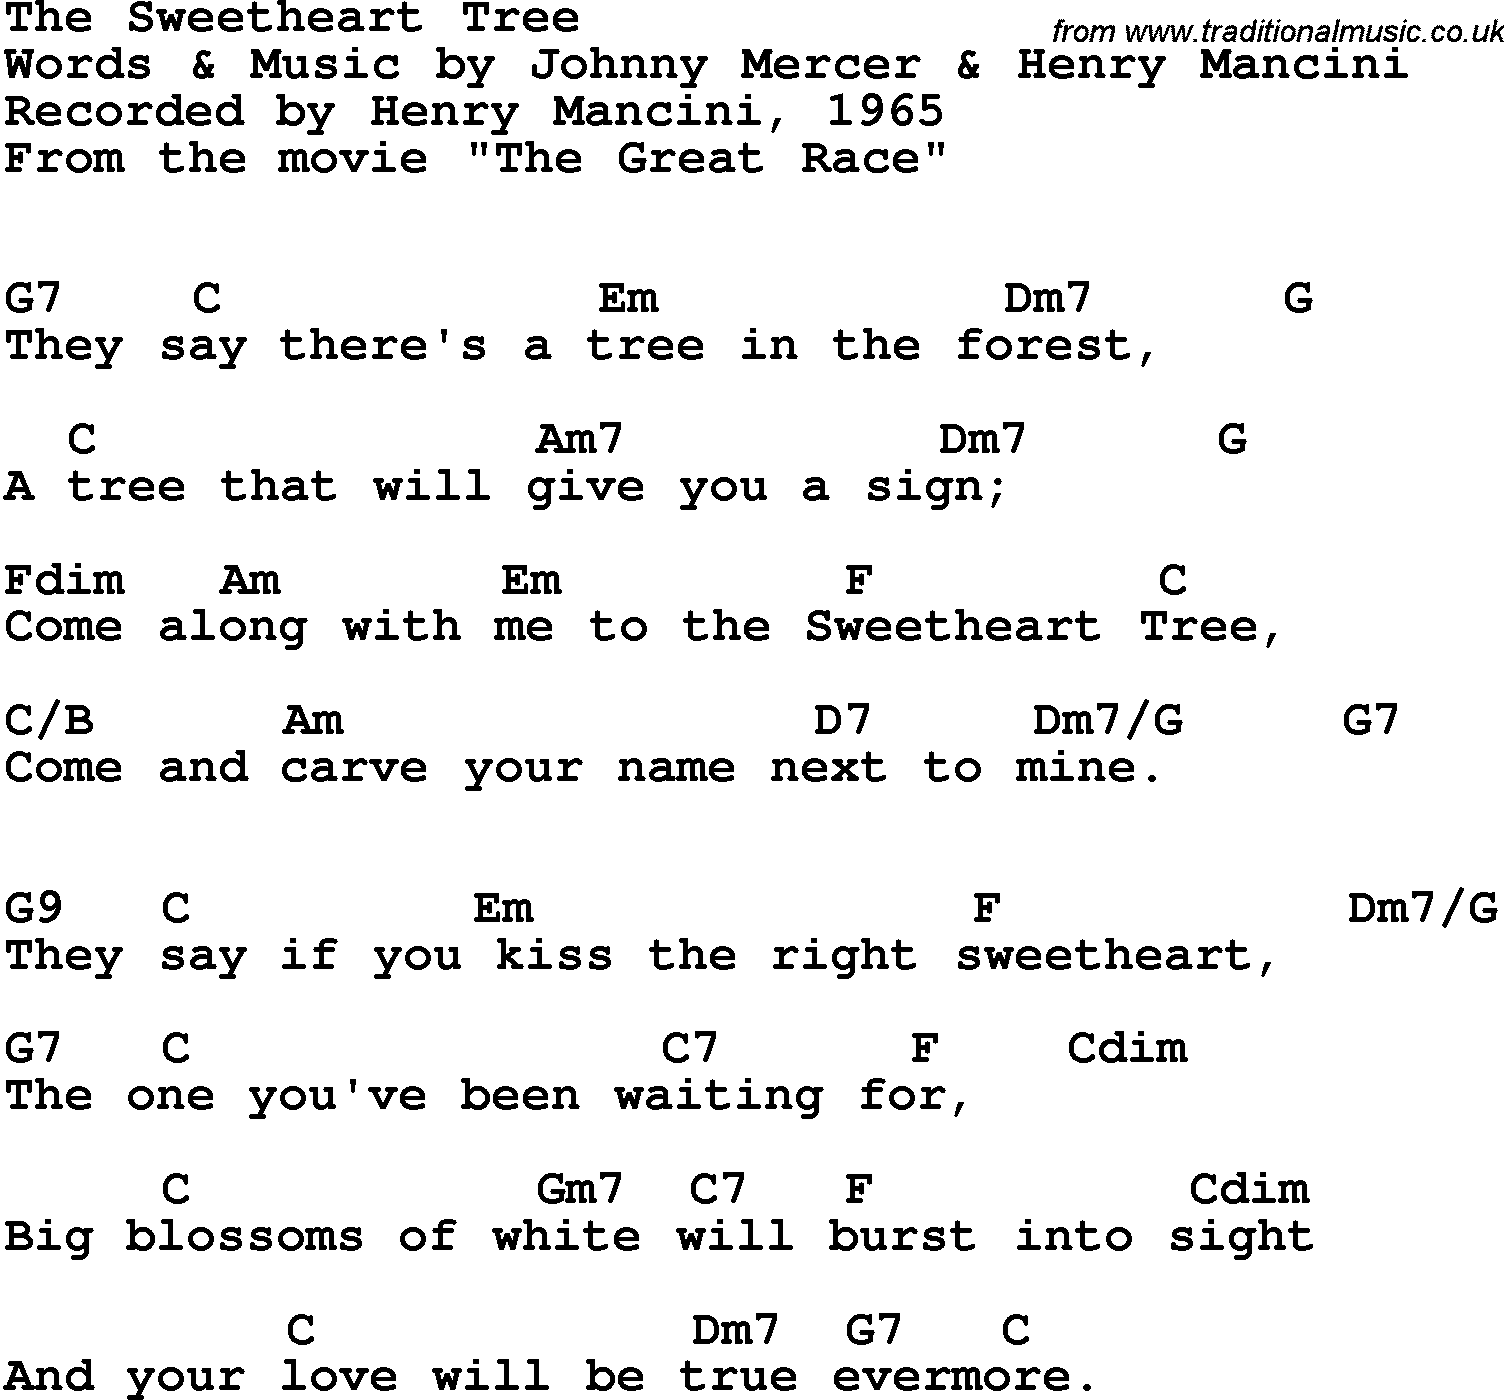 Song Lyrics With Guitar Chords For Sweetheart Tree The Henry Mancini 